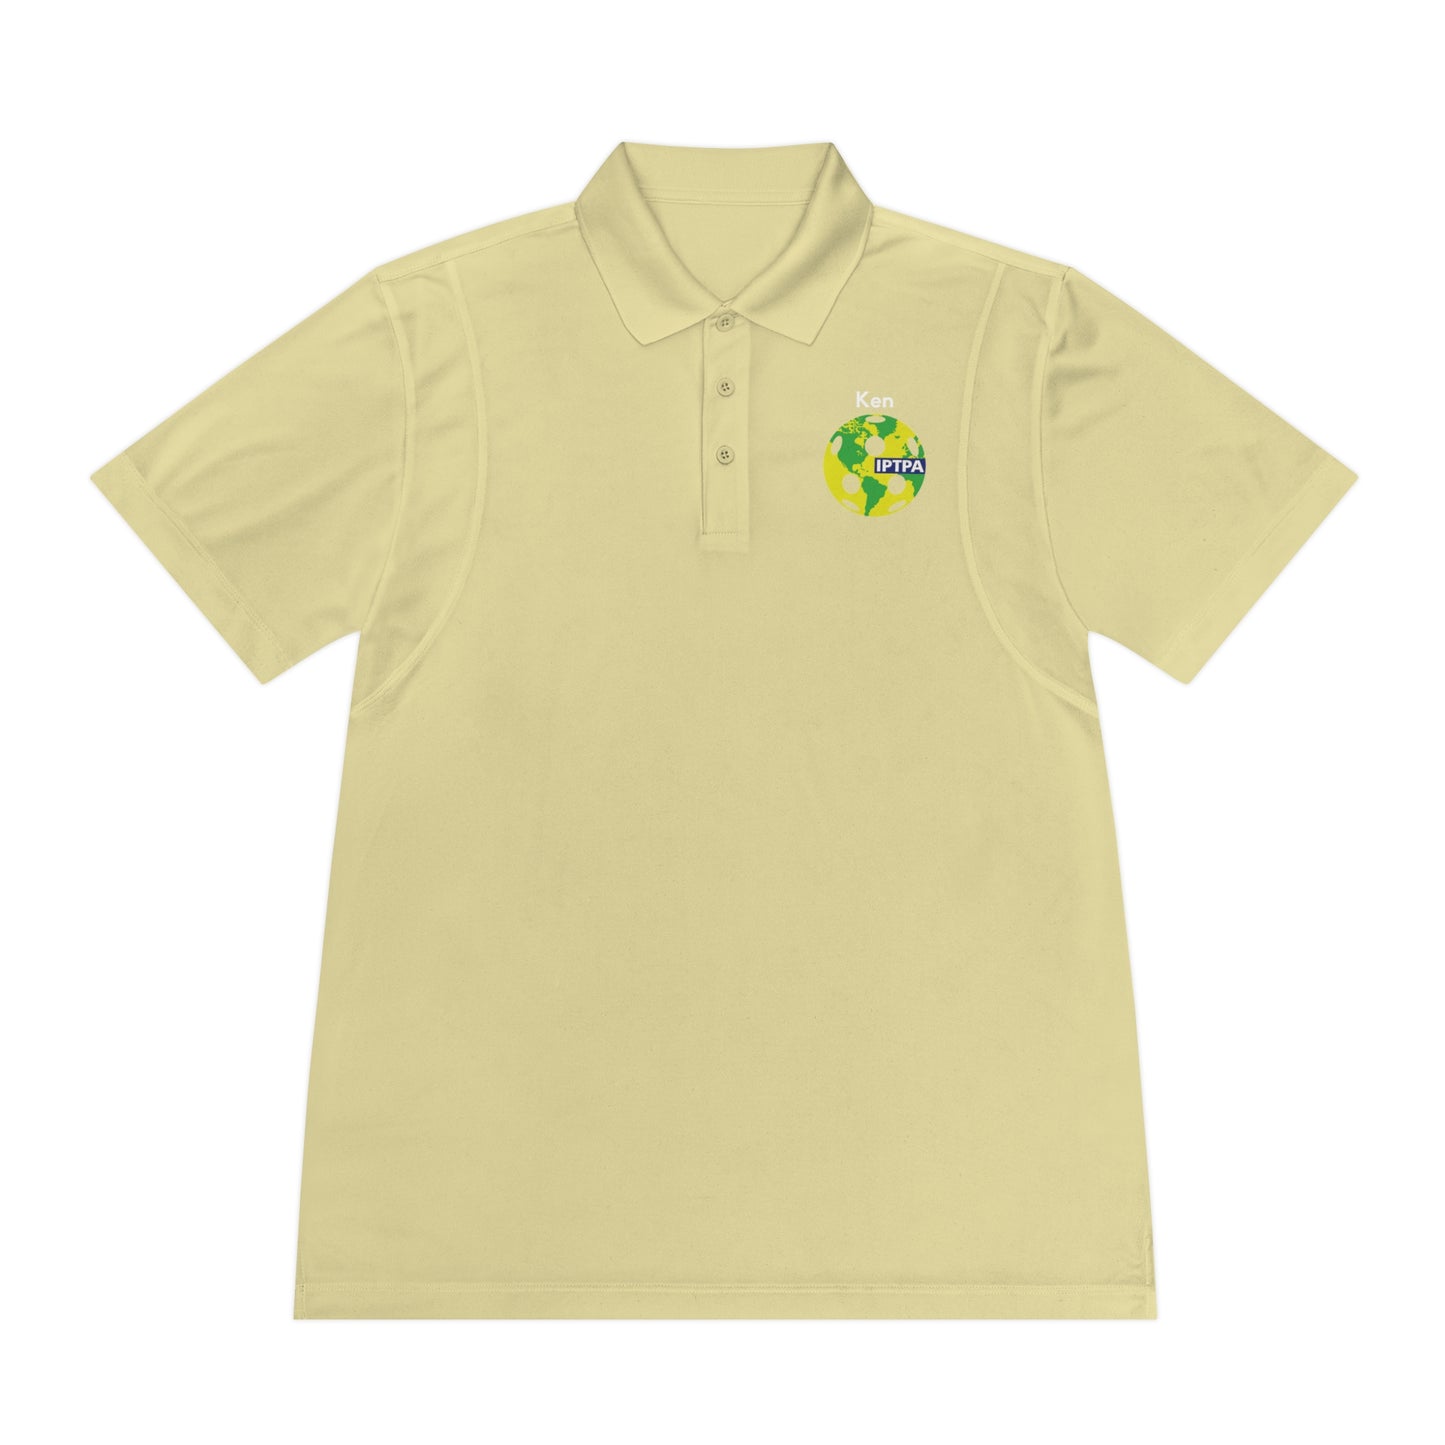 Men's Sport Polo Shirt Can Customize Name Front and/or Back